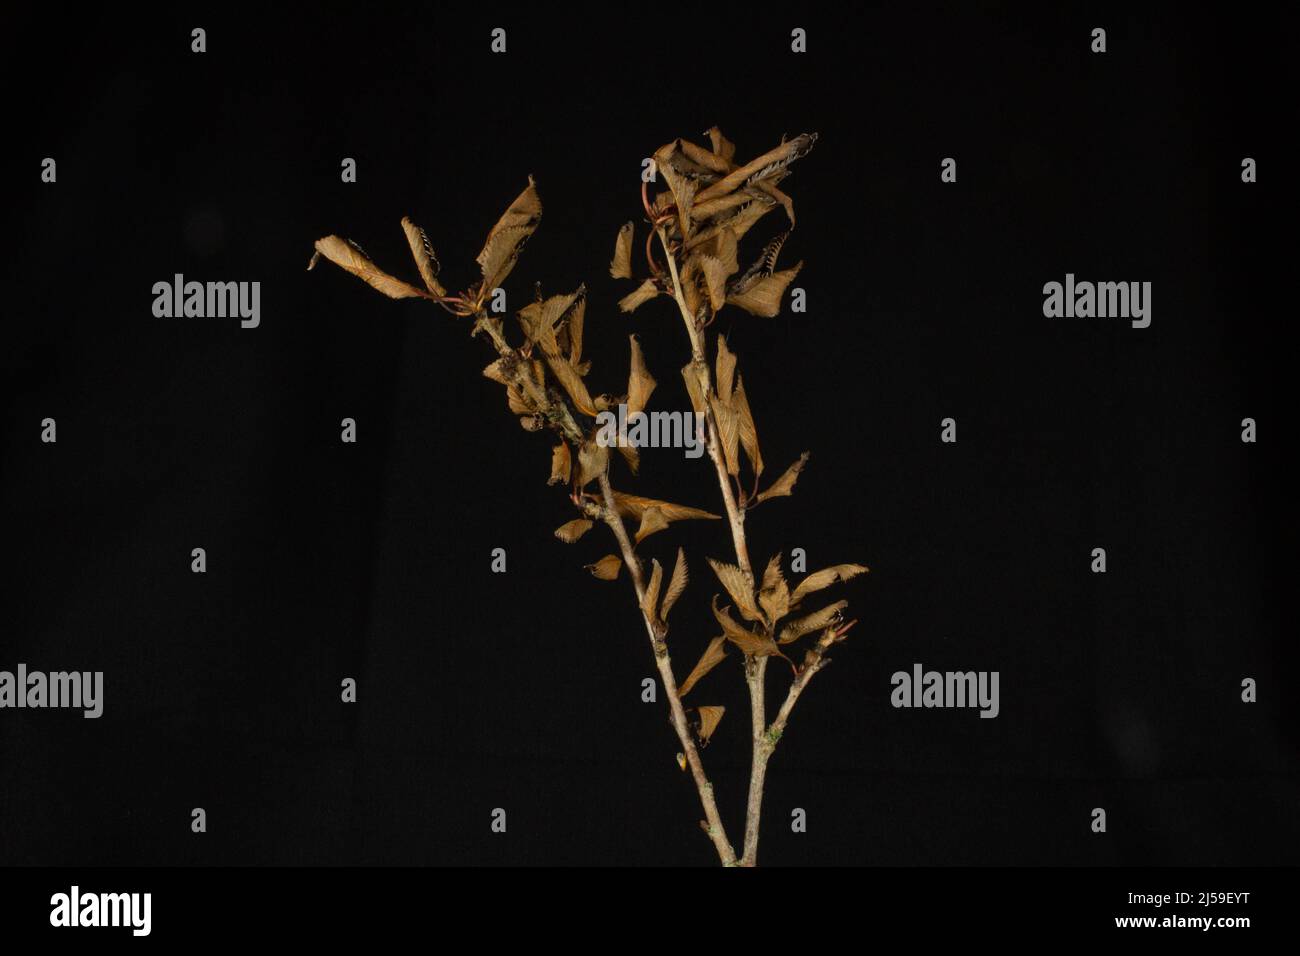 a forked branch of brown dead leaves isolated with white light on a black background Stock Photo